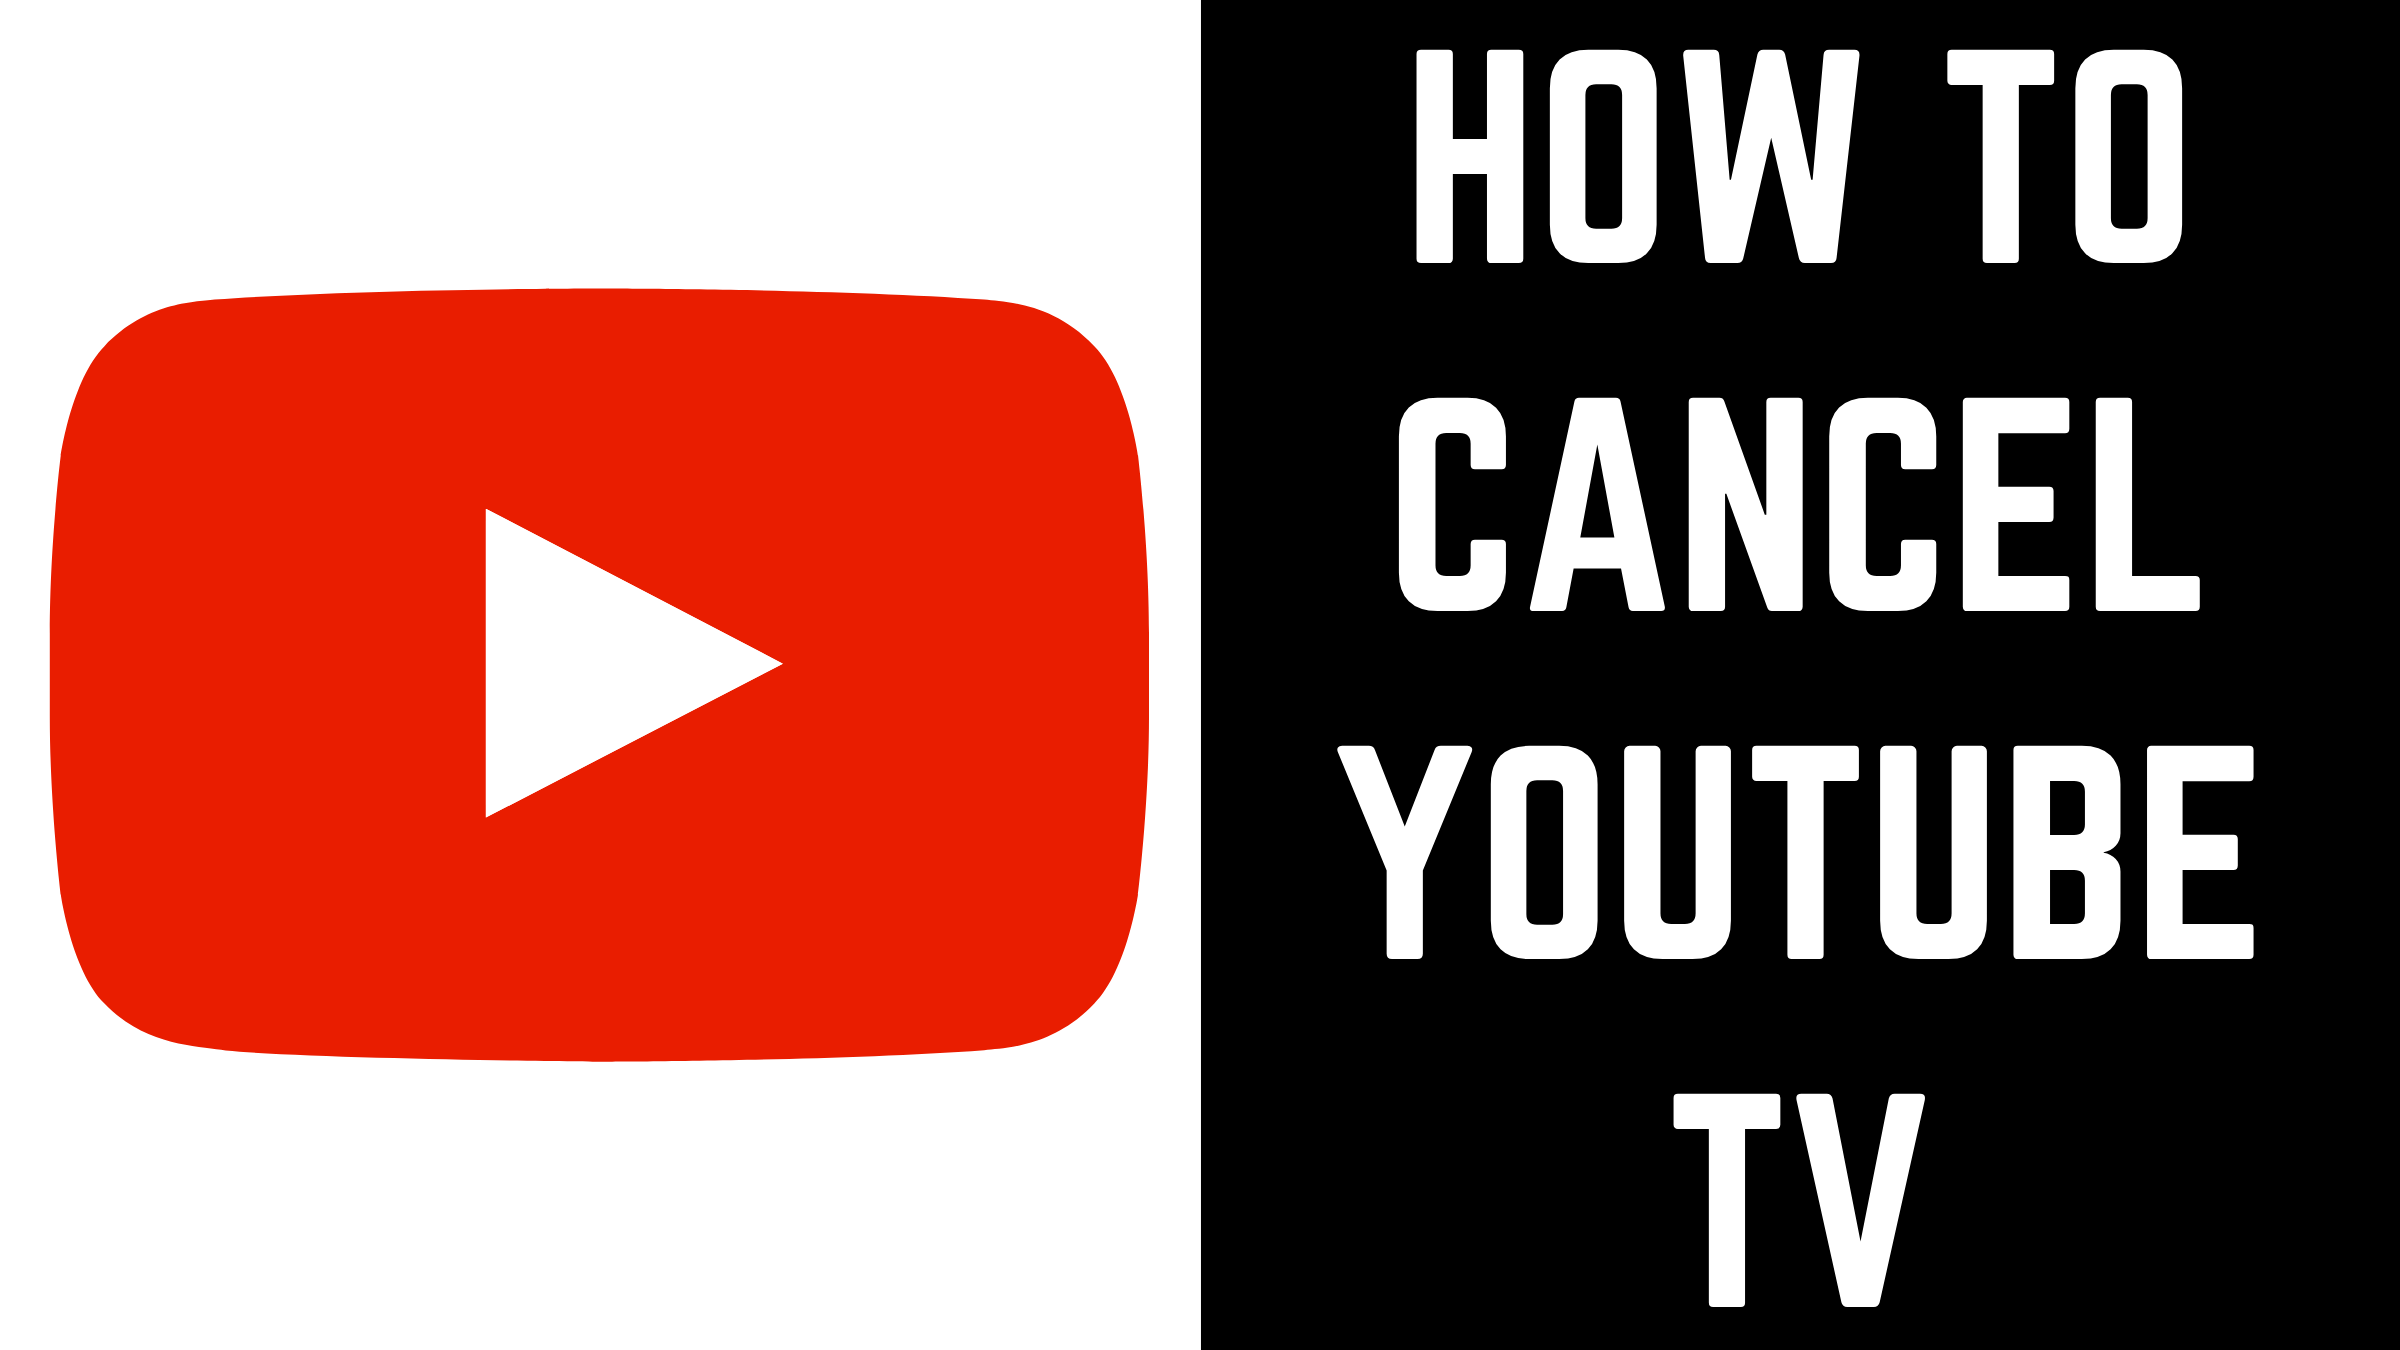 How to cancel youtube tv?